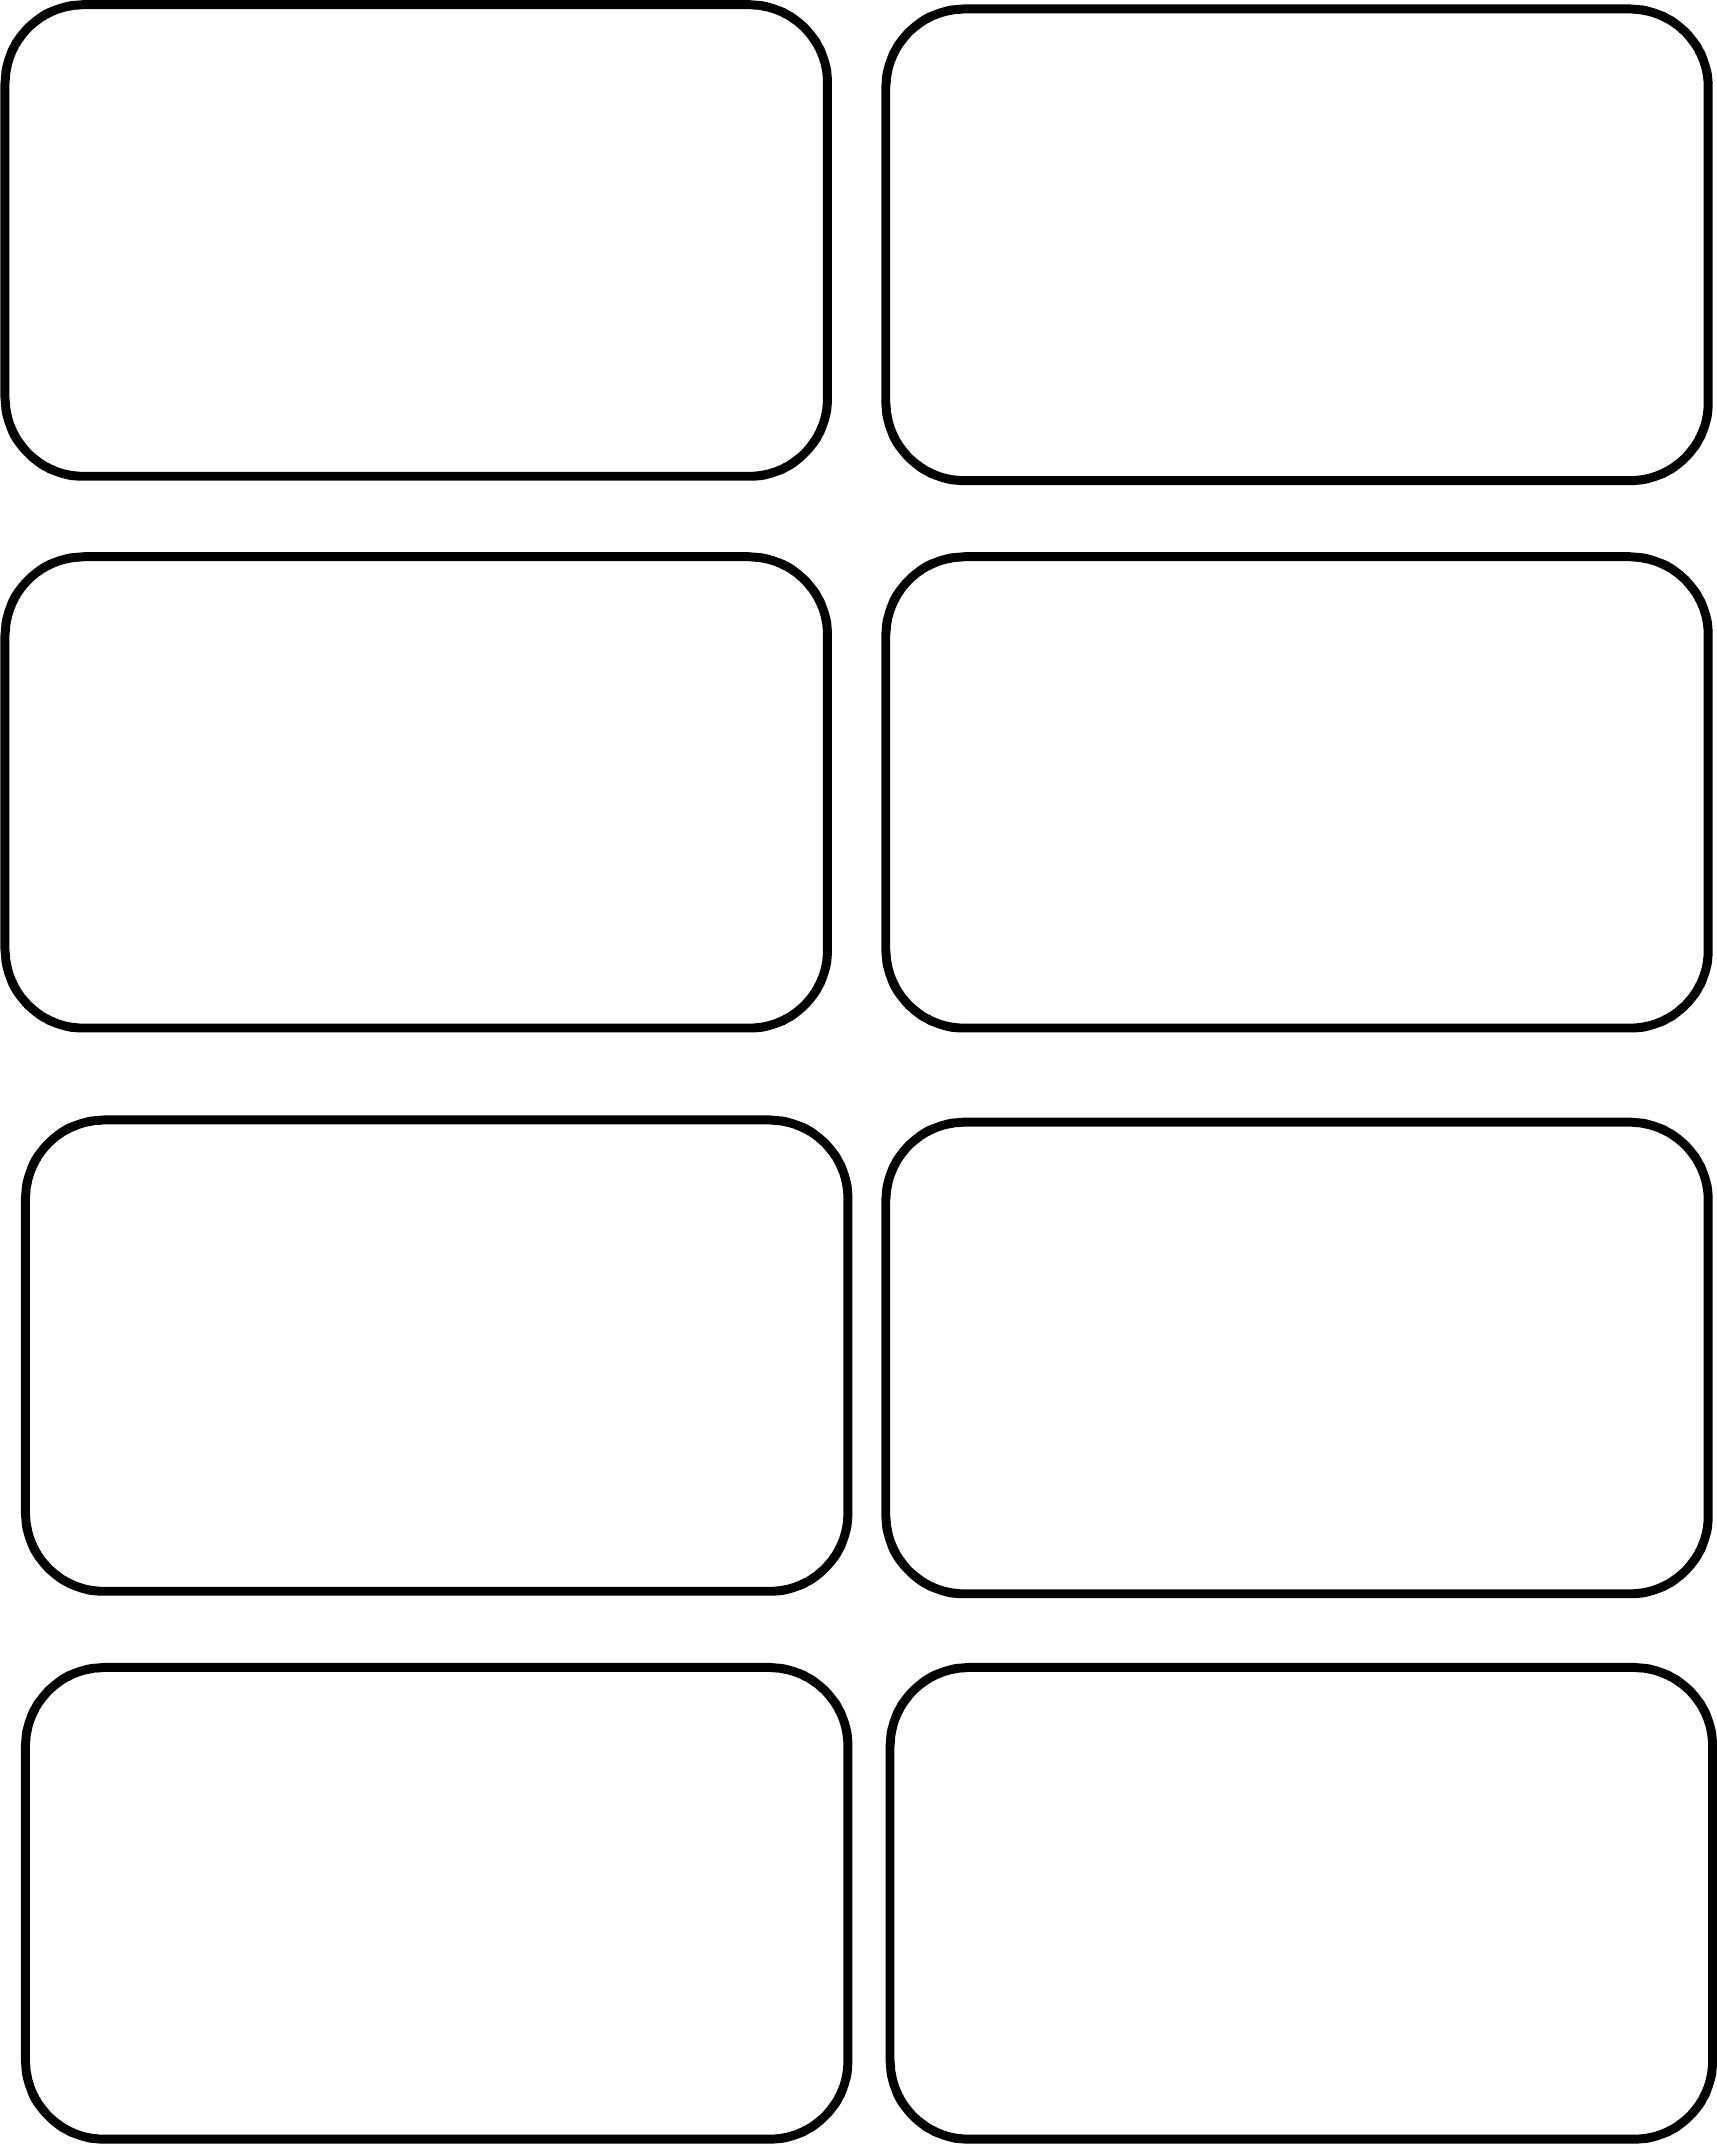 Template Of Luggage Tag Free Download Pertaining To Blank Luggage Tag Template